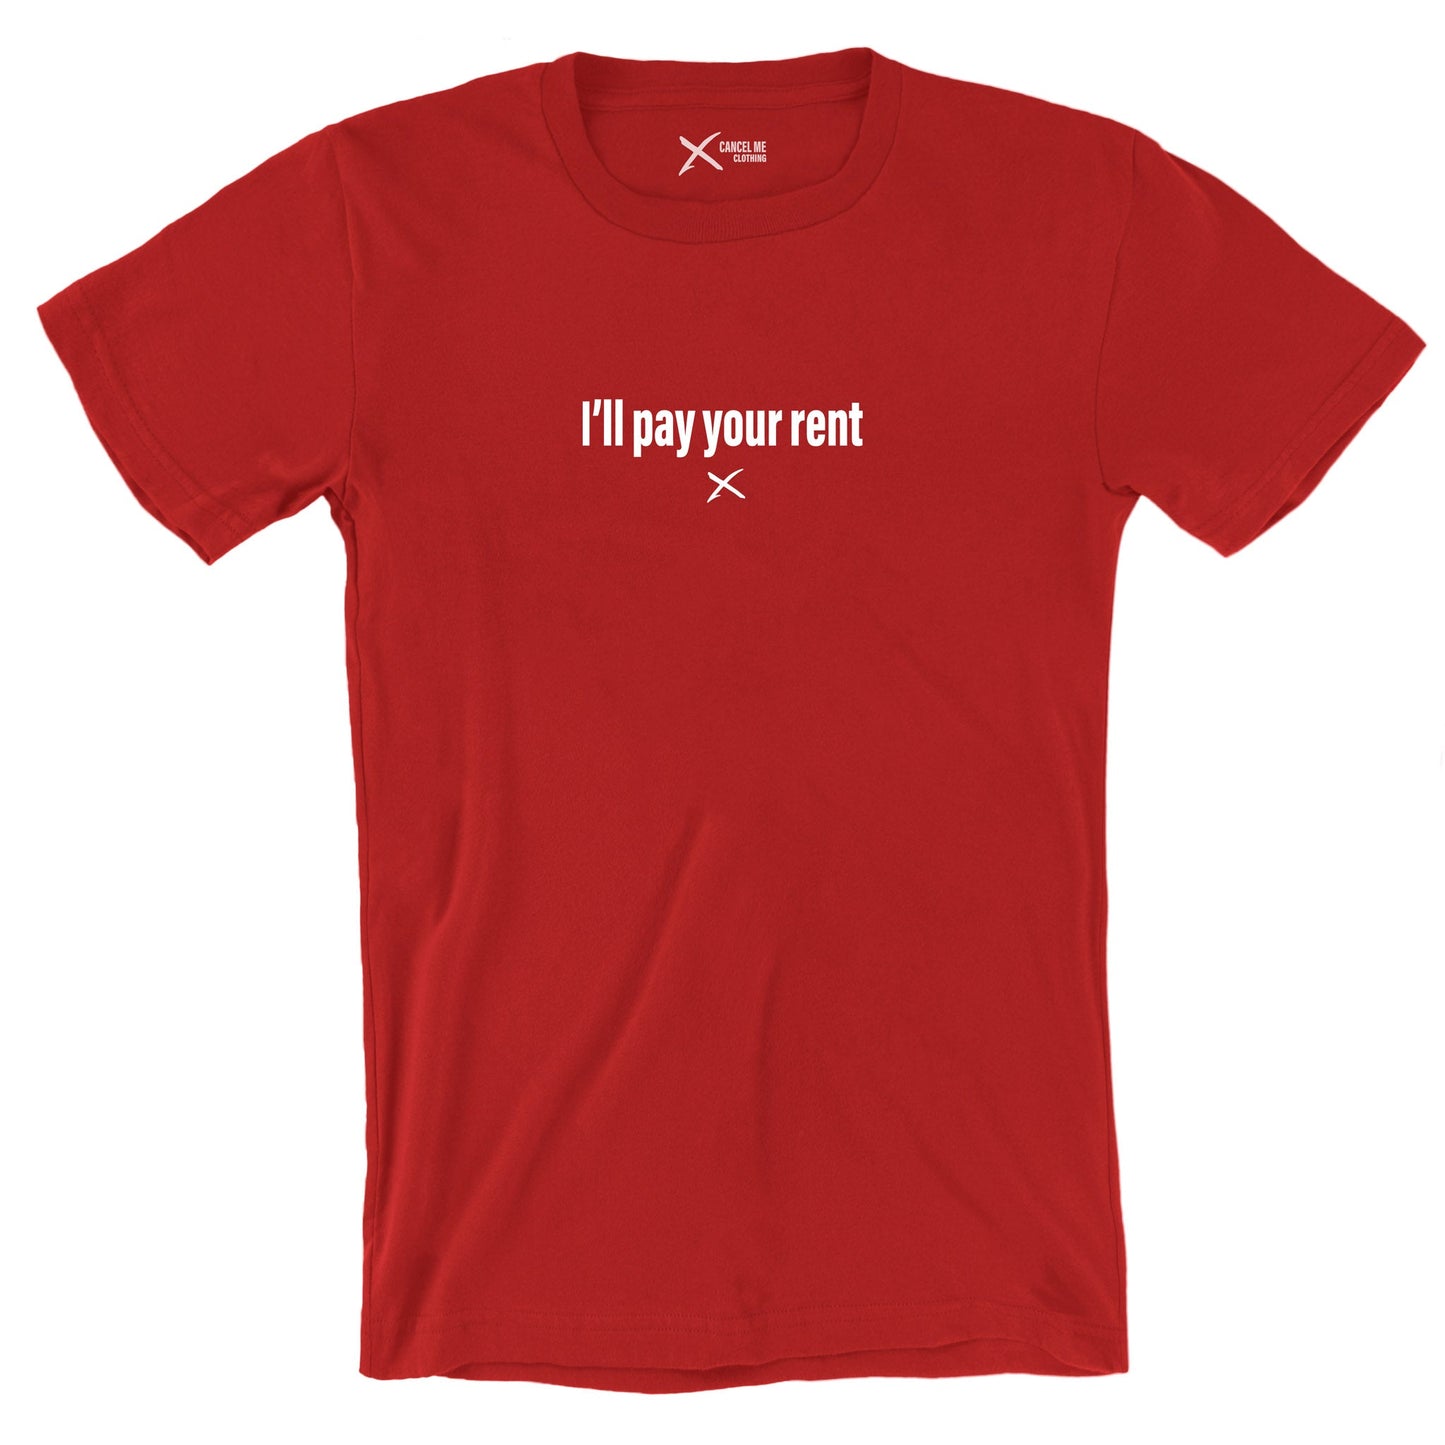 I'll pay your rent - Shirt